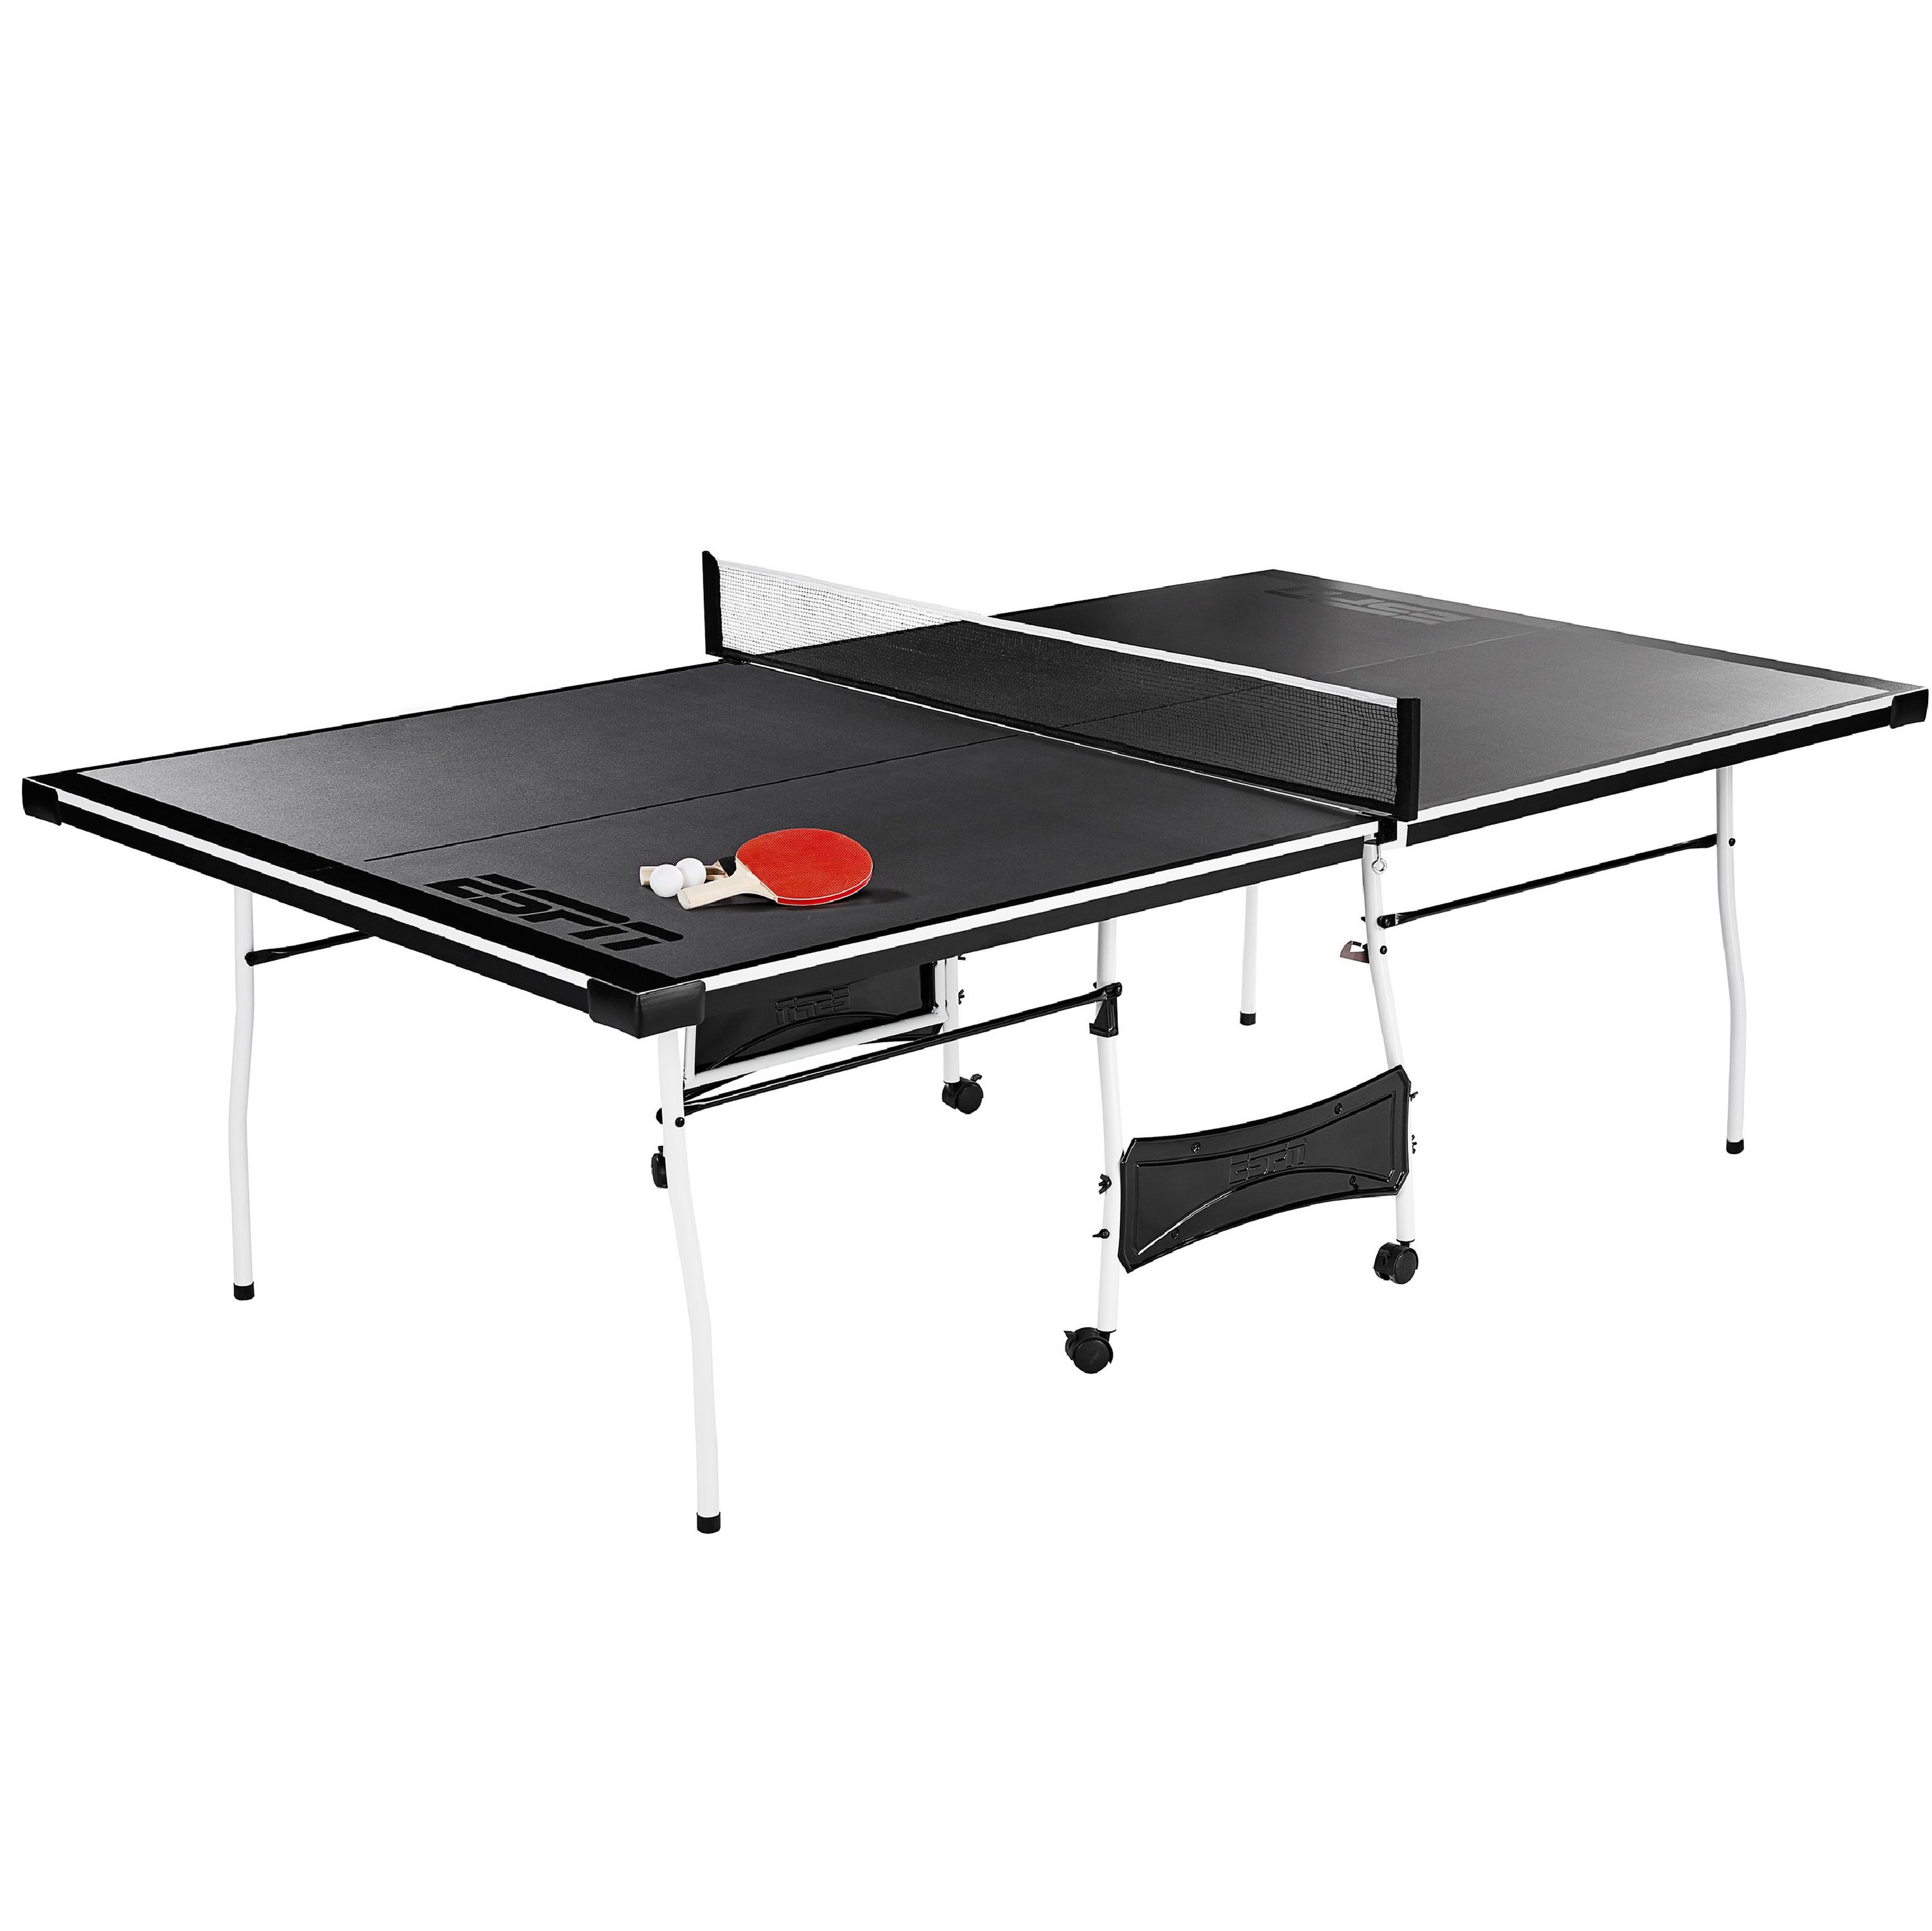 ESPN Mid Size 15mm 4-Piece Indoor Table Tennis Table, Accessories Included, Black - image 1 of 13